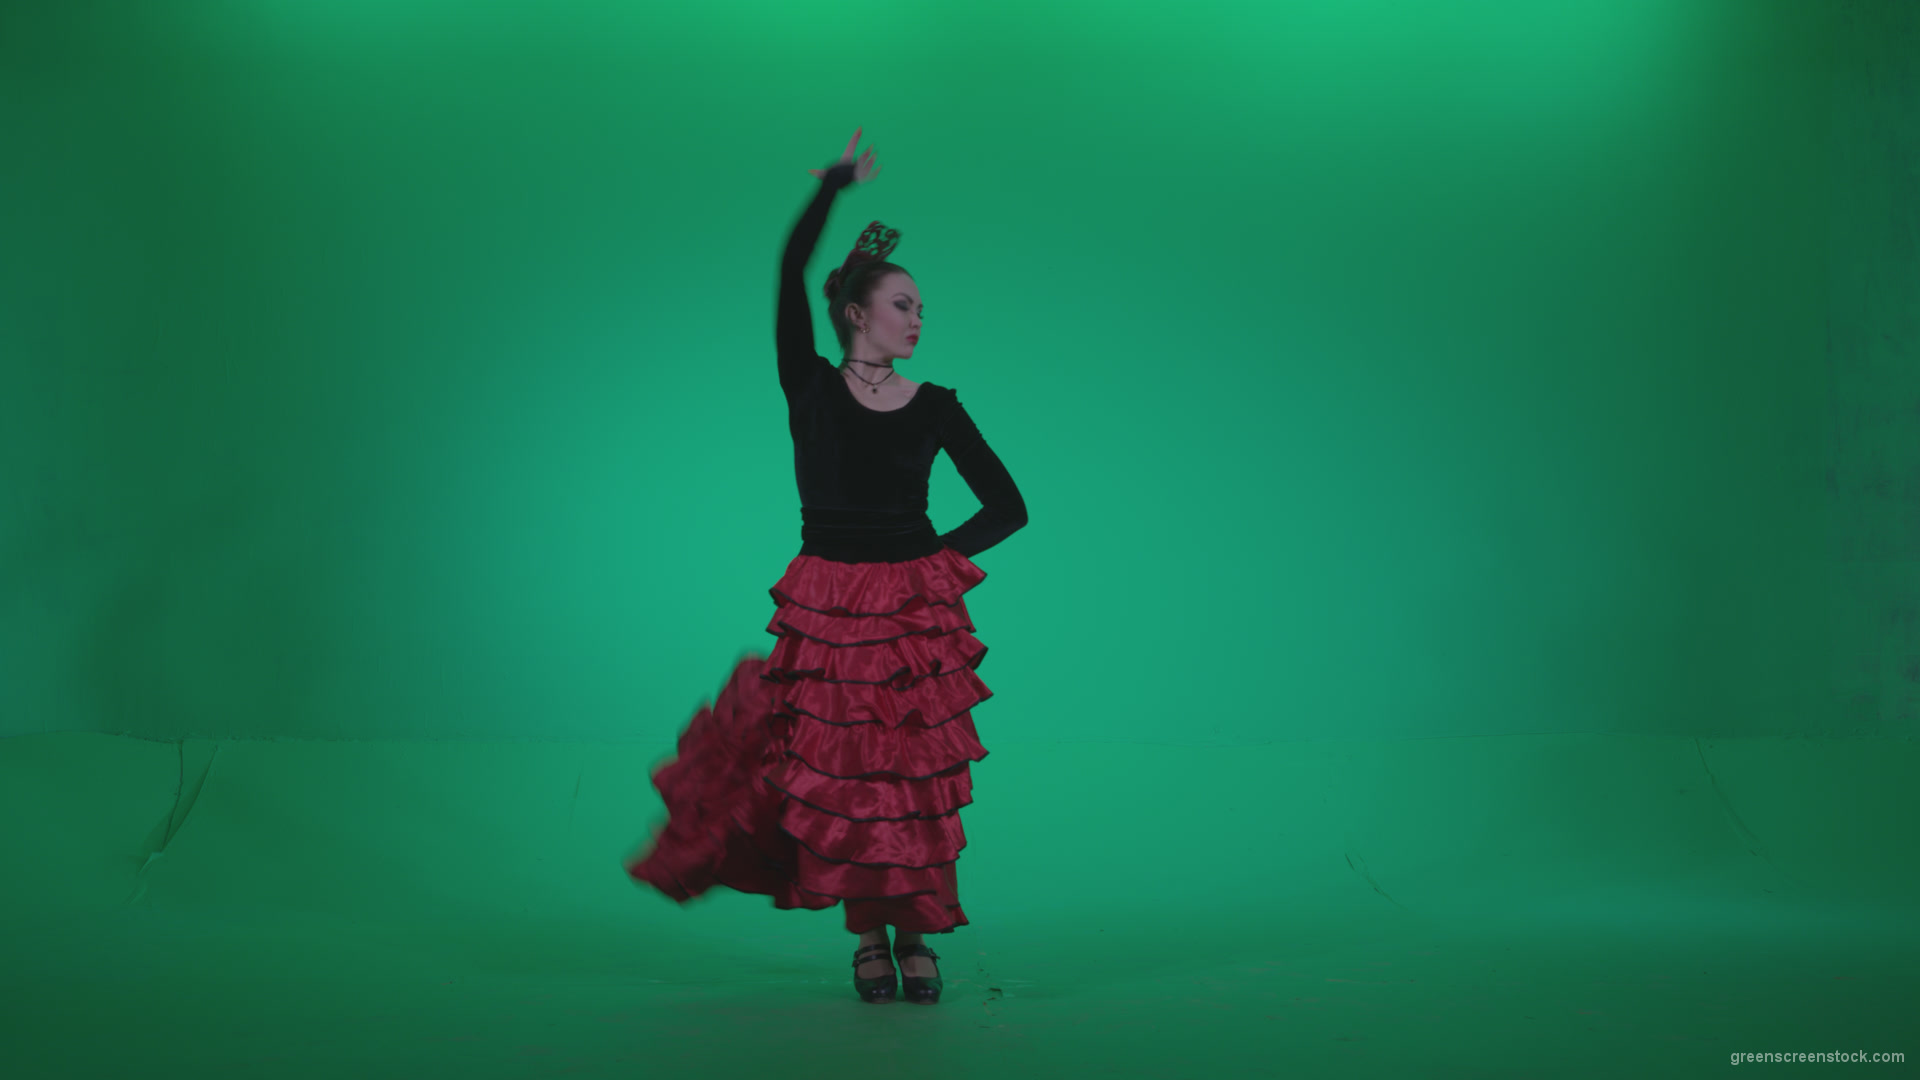 Flamenco-Red-and-Black-Dress-rb5-Green-Screen-Video-Footage_007 Green Screen Stock